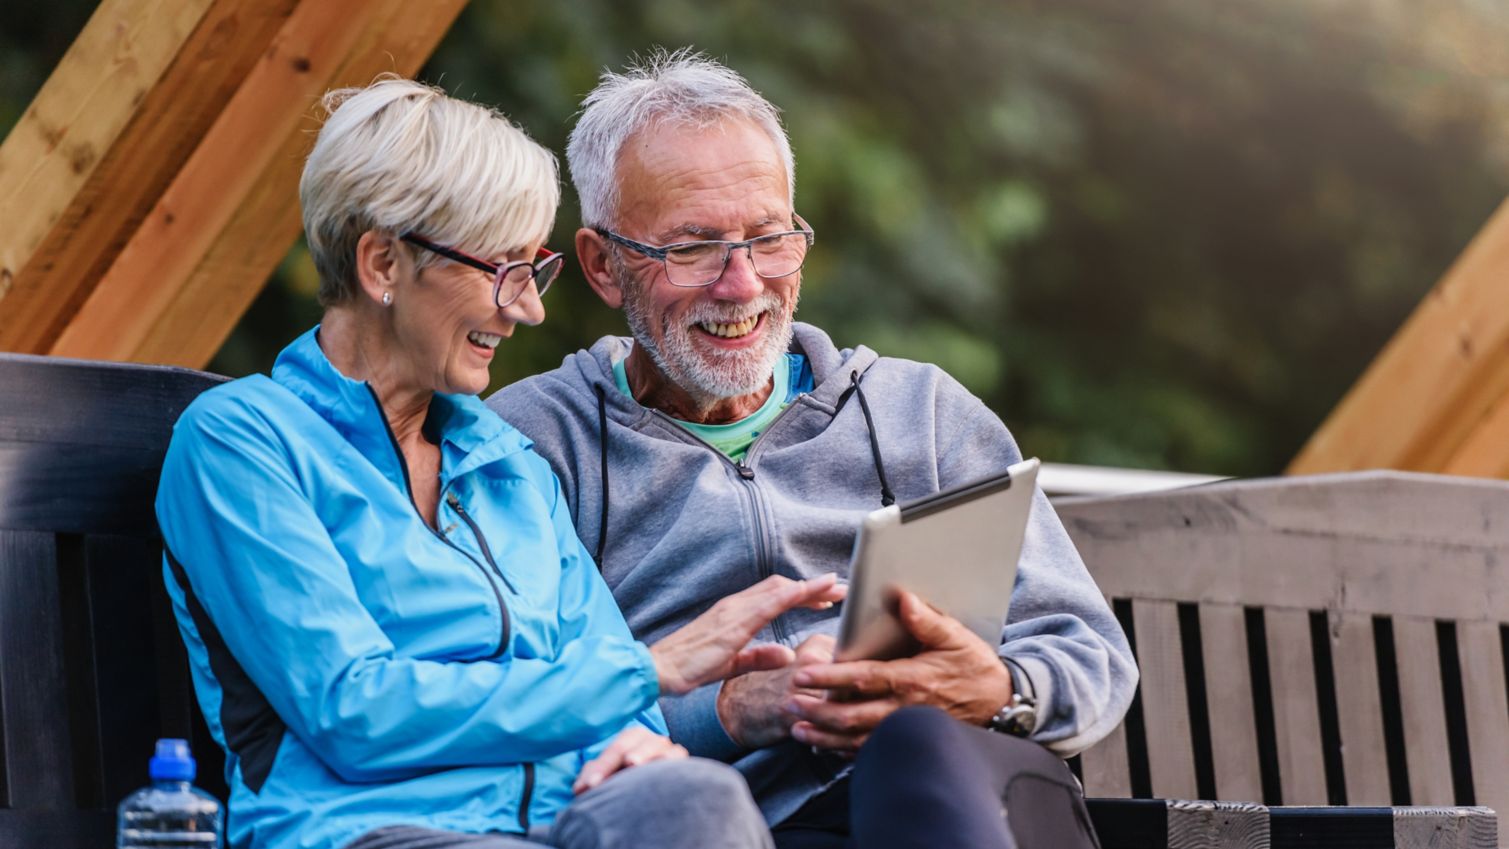 Smiling man and woman use a tablet.